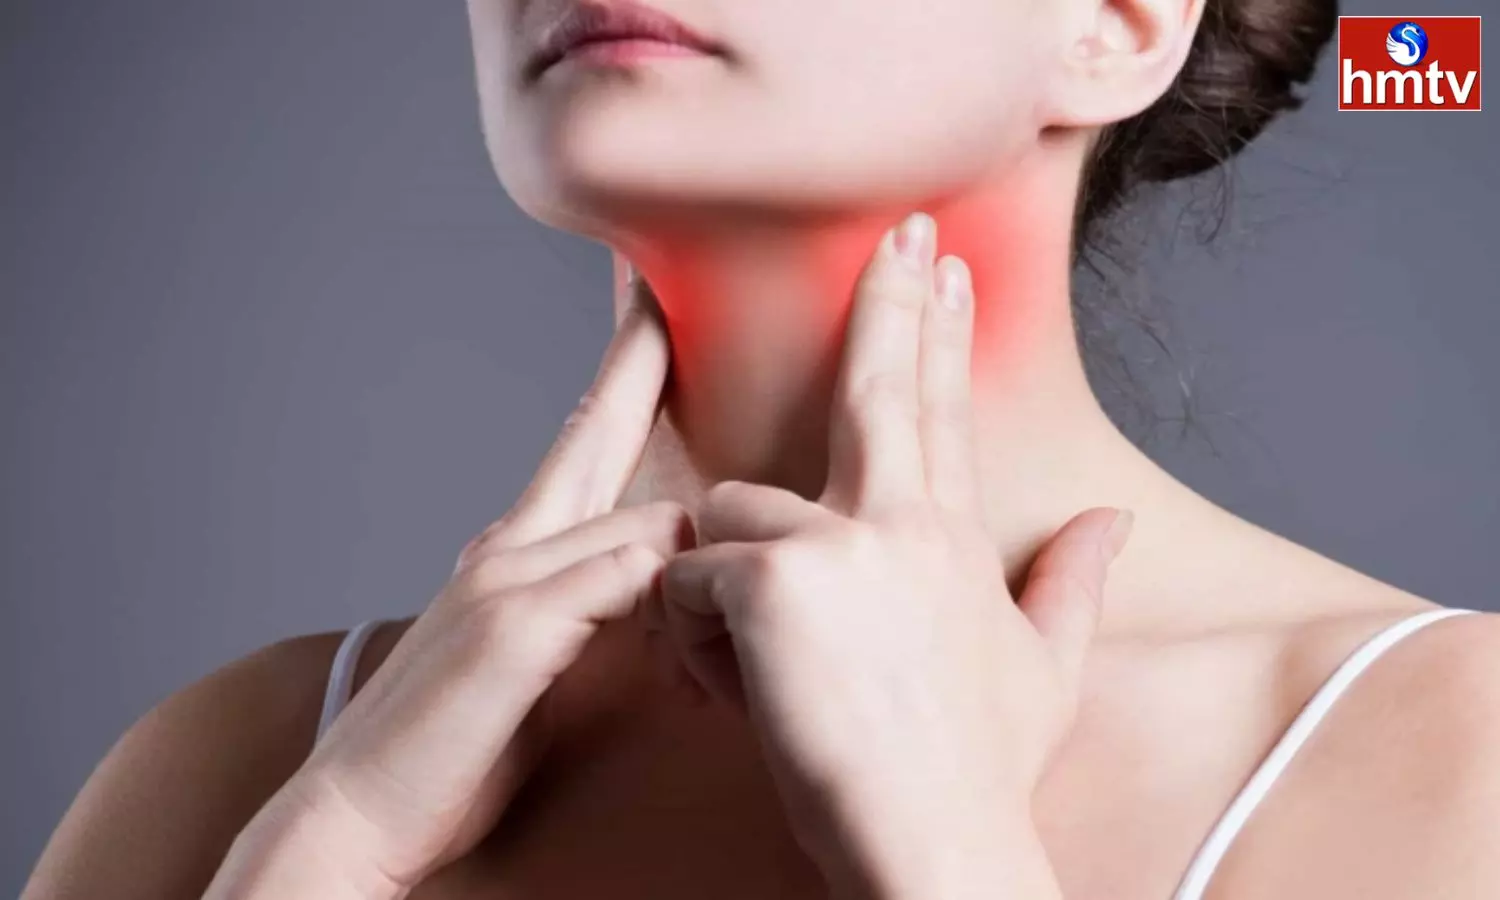 Sore Throat Problem Occurs When the Season has Changed Follow these Tips and Get Rid of it